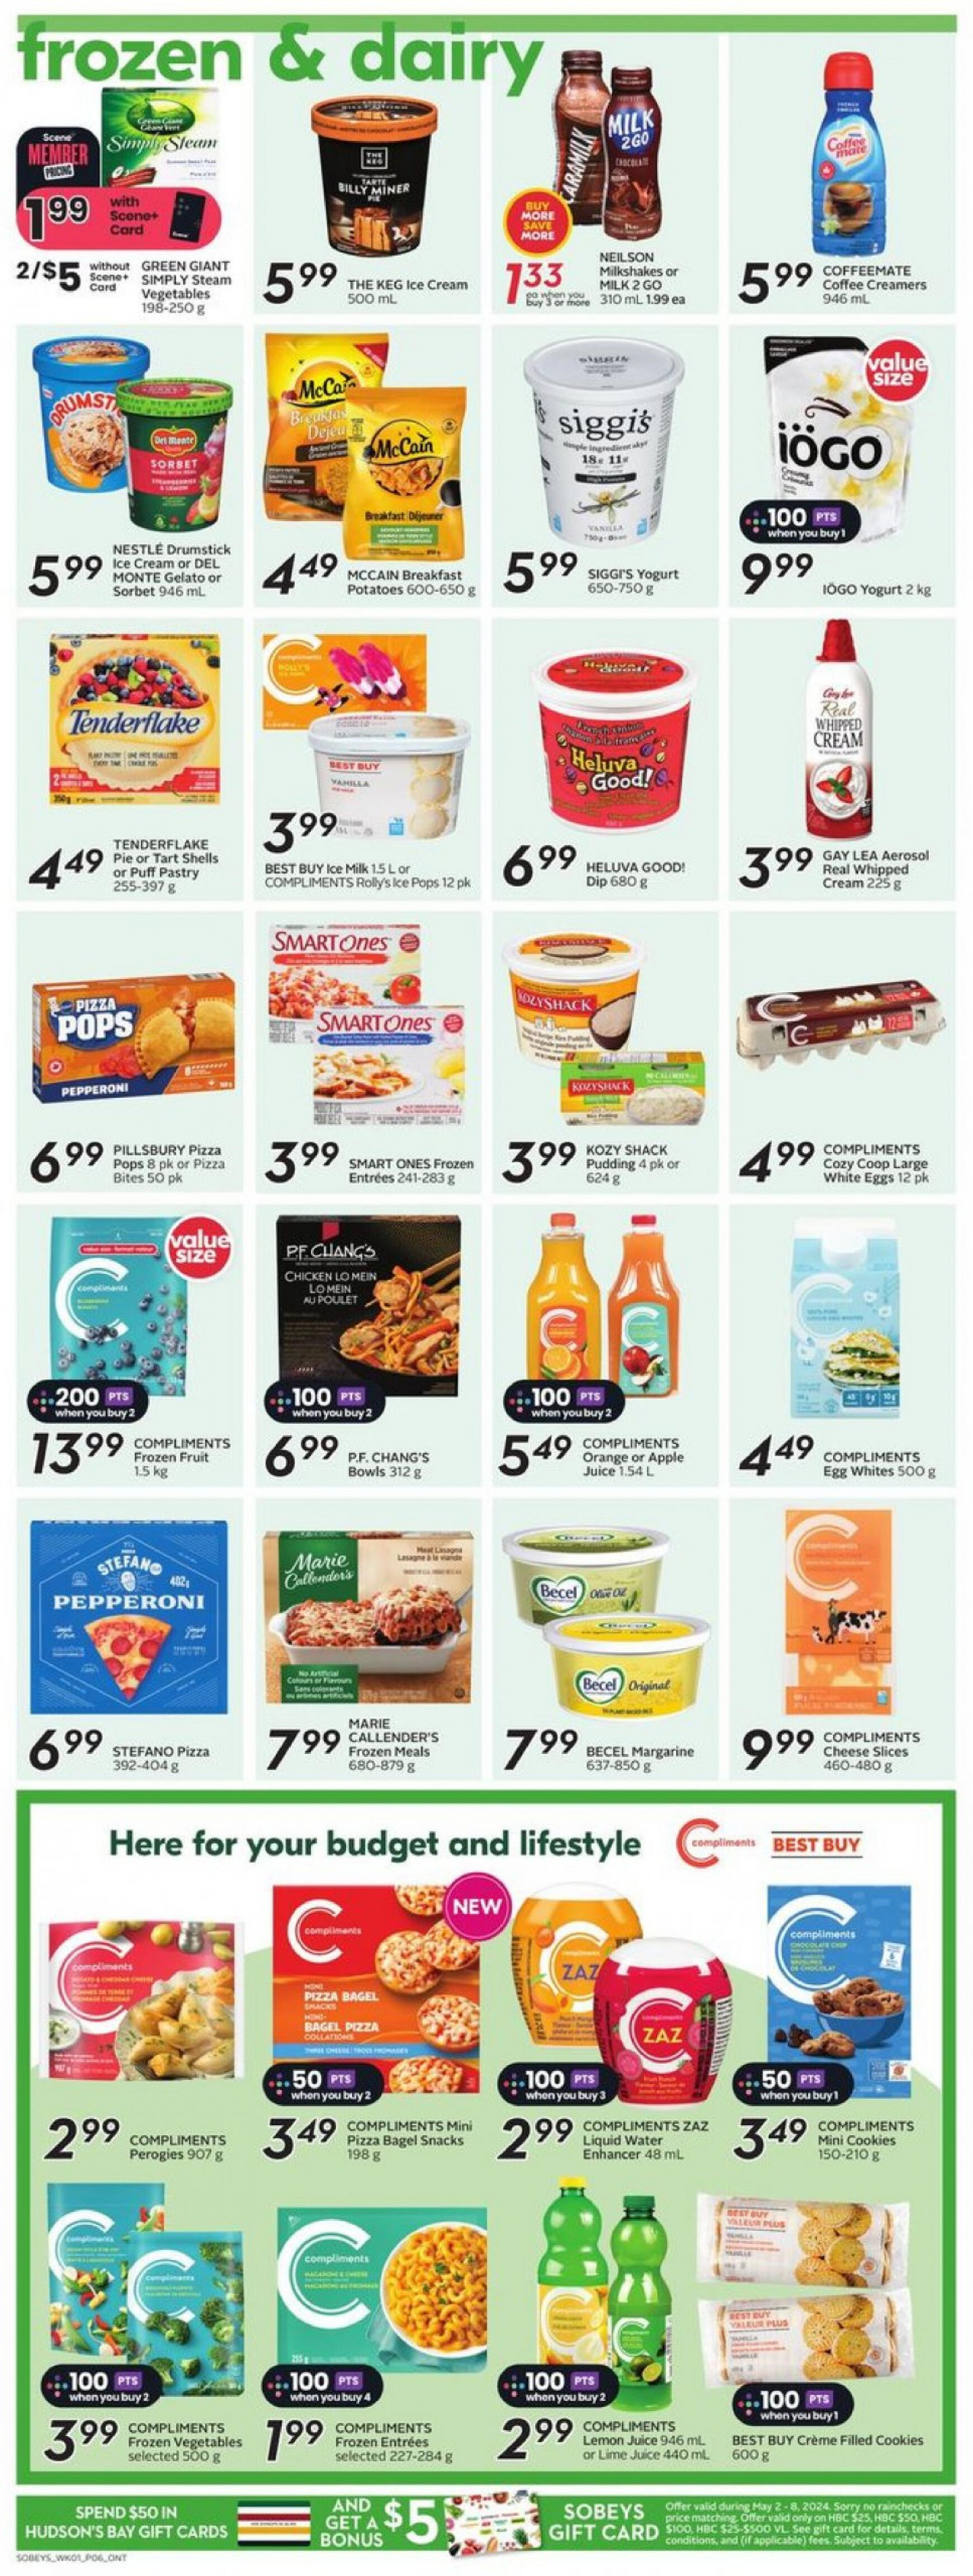 sobeys - Sobeys - Weekly Flyer - Ontario flyer current 02.05. - 08.05. - page: 11